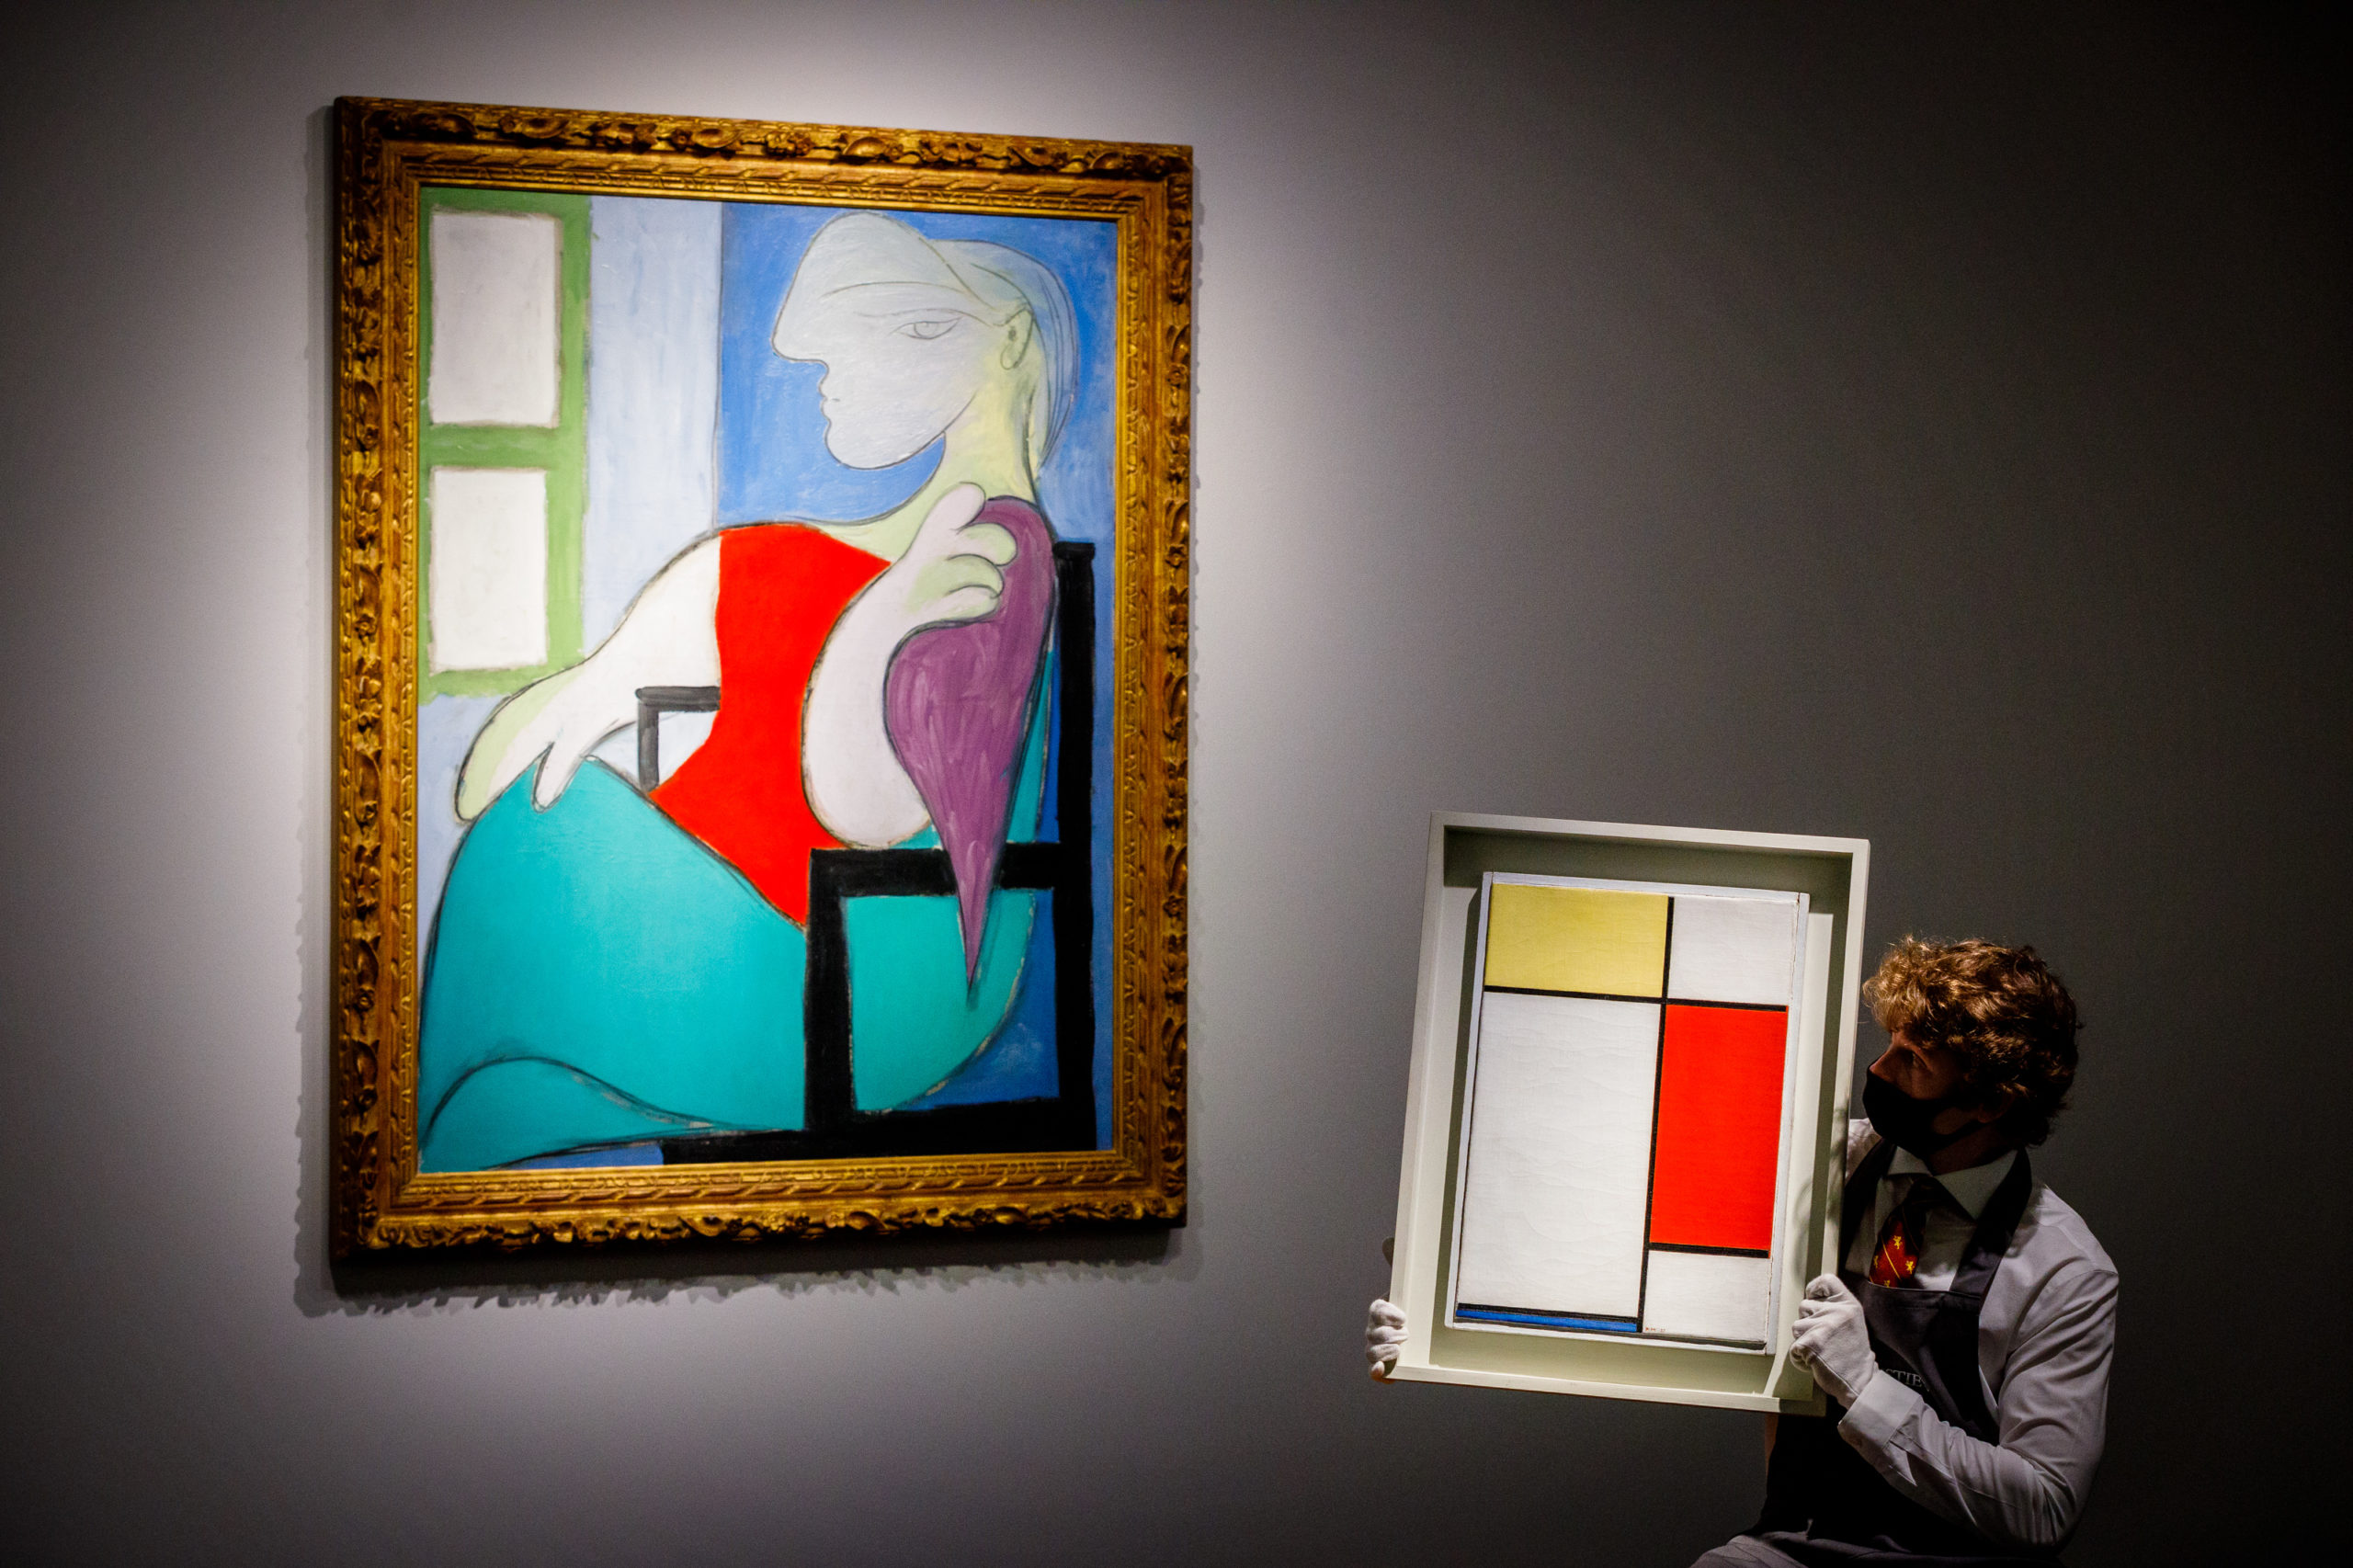 Pablo Picasso's Femme assise pres d'une fenetre (Marie-Therese) est. $55 million and Piet Mondrian's Composition: No. II, with Yellow, Red and Blue, est. $25 million, go on view to the public at Christie's on April 22, 2021 in London, England. (Photo by Tristan Fewings/Getty Images)